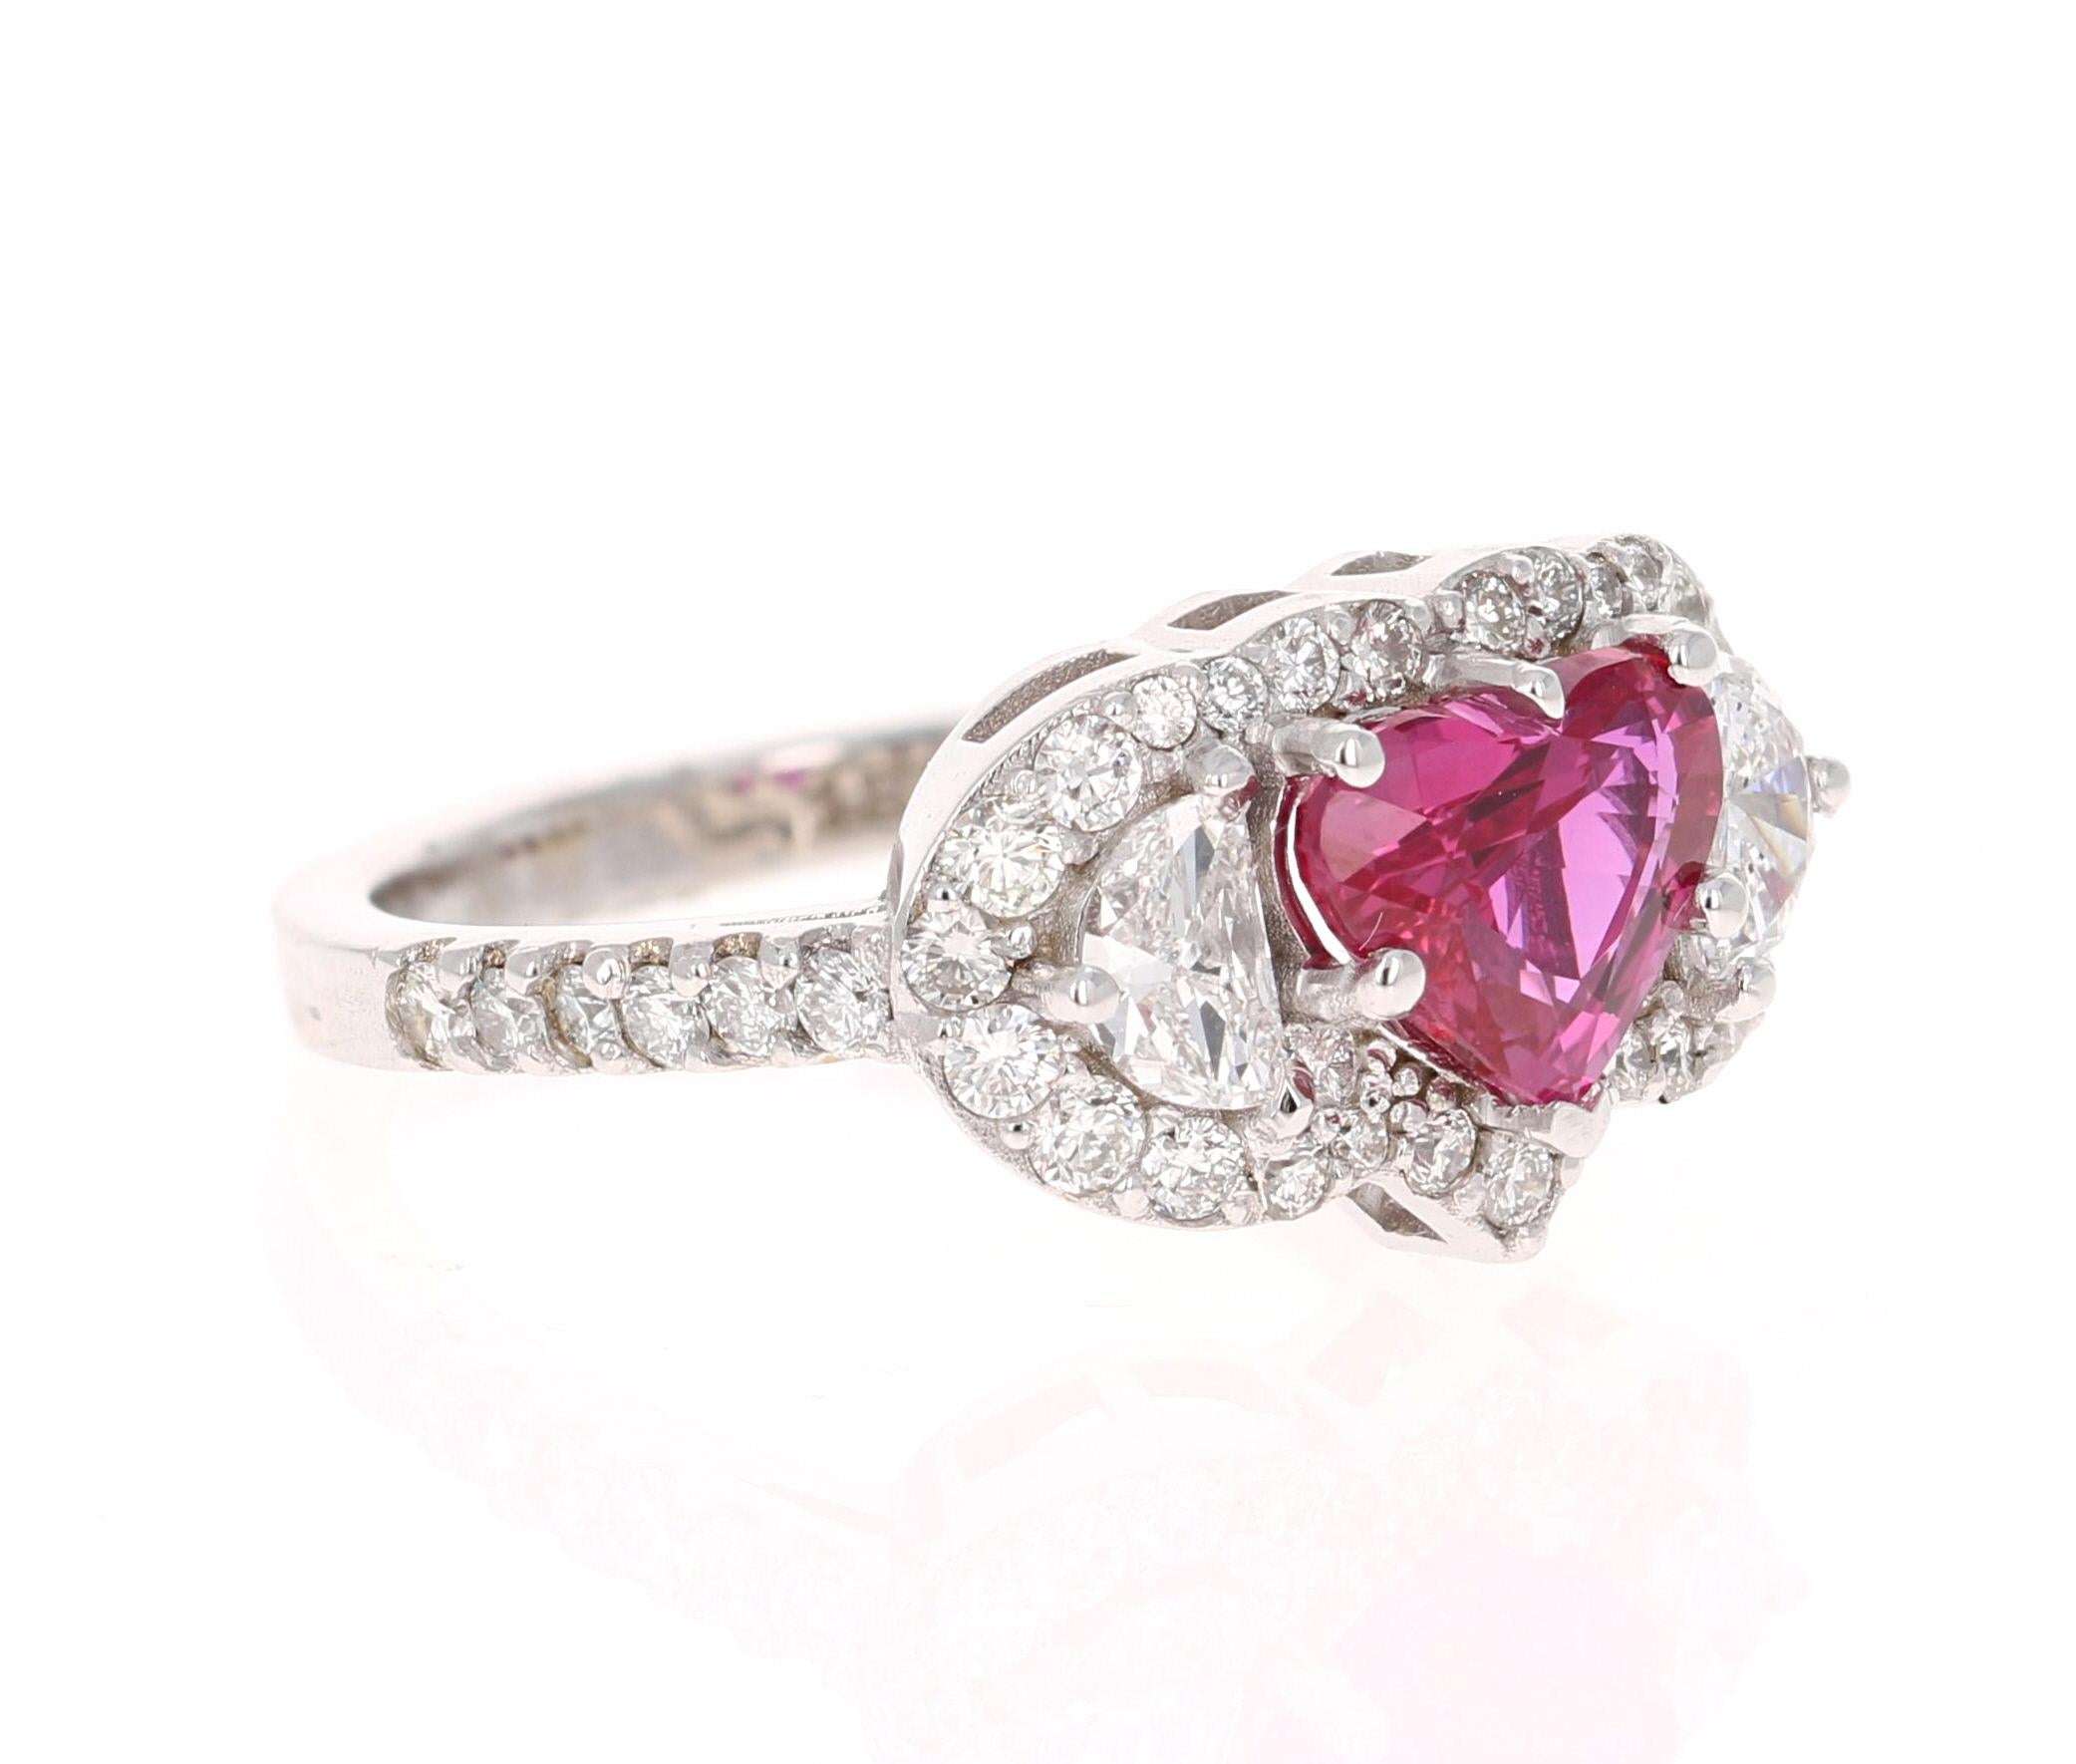 This ring has a stunning Heart Cut GIA Certified Ruby that weighs 1.73 carats. The Ruby is Natural and has no indications of Heating. The measurements of the heart are approximately 6.6 mm x 8 mm. 
The ring is surrounded by 2 Half Moon Cut Diamonds